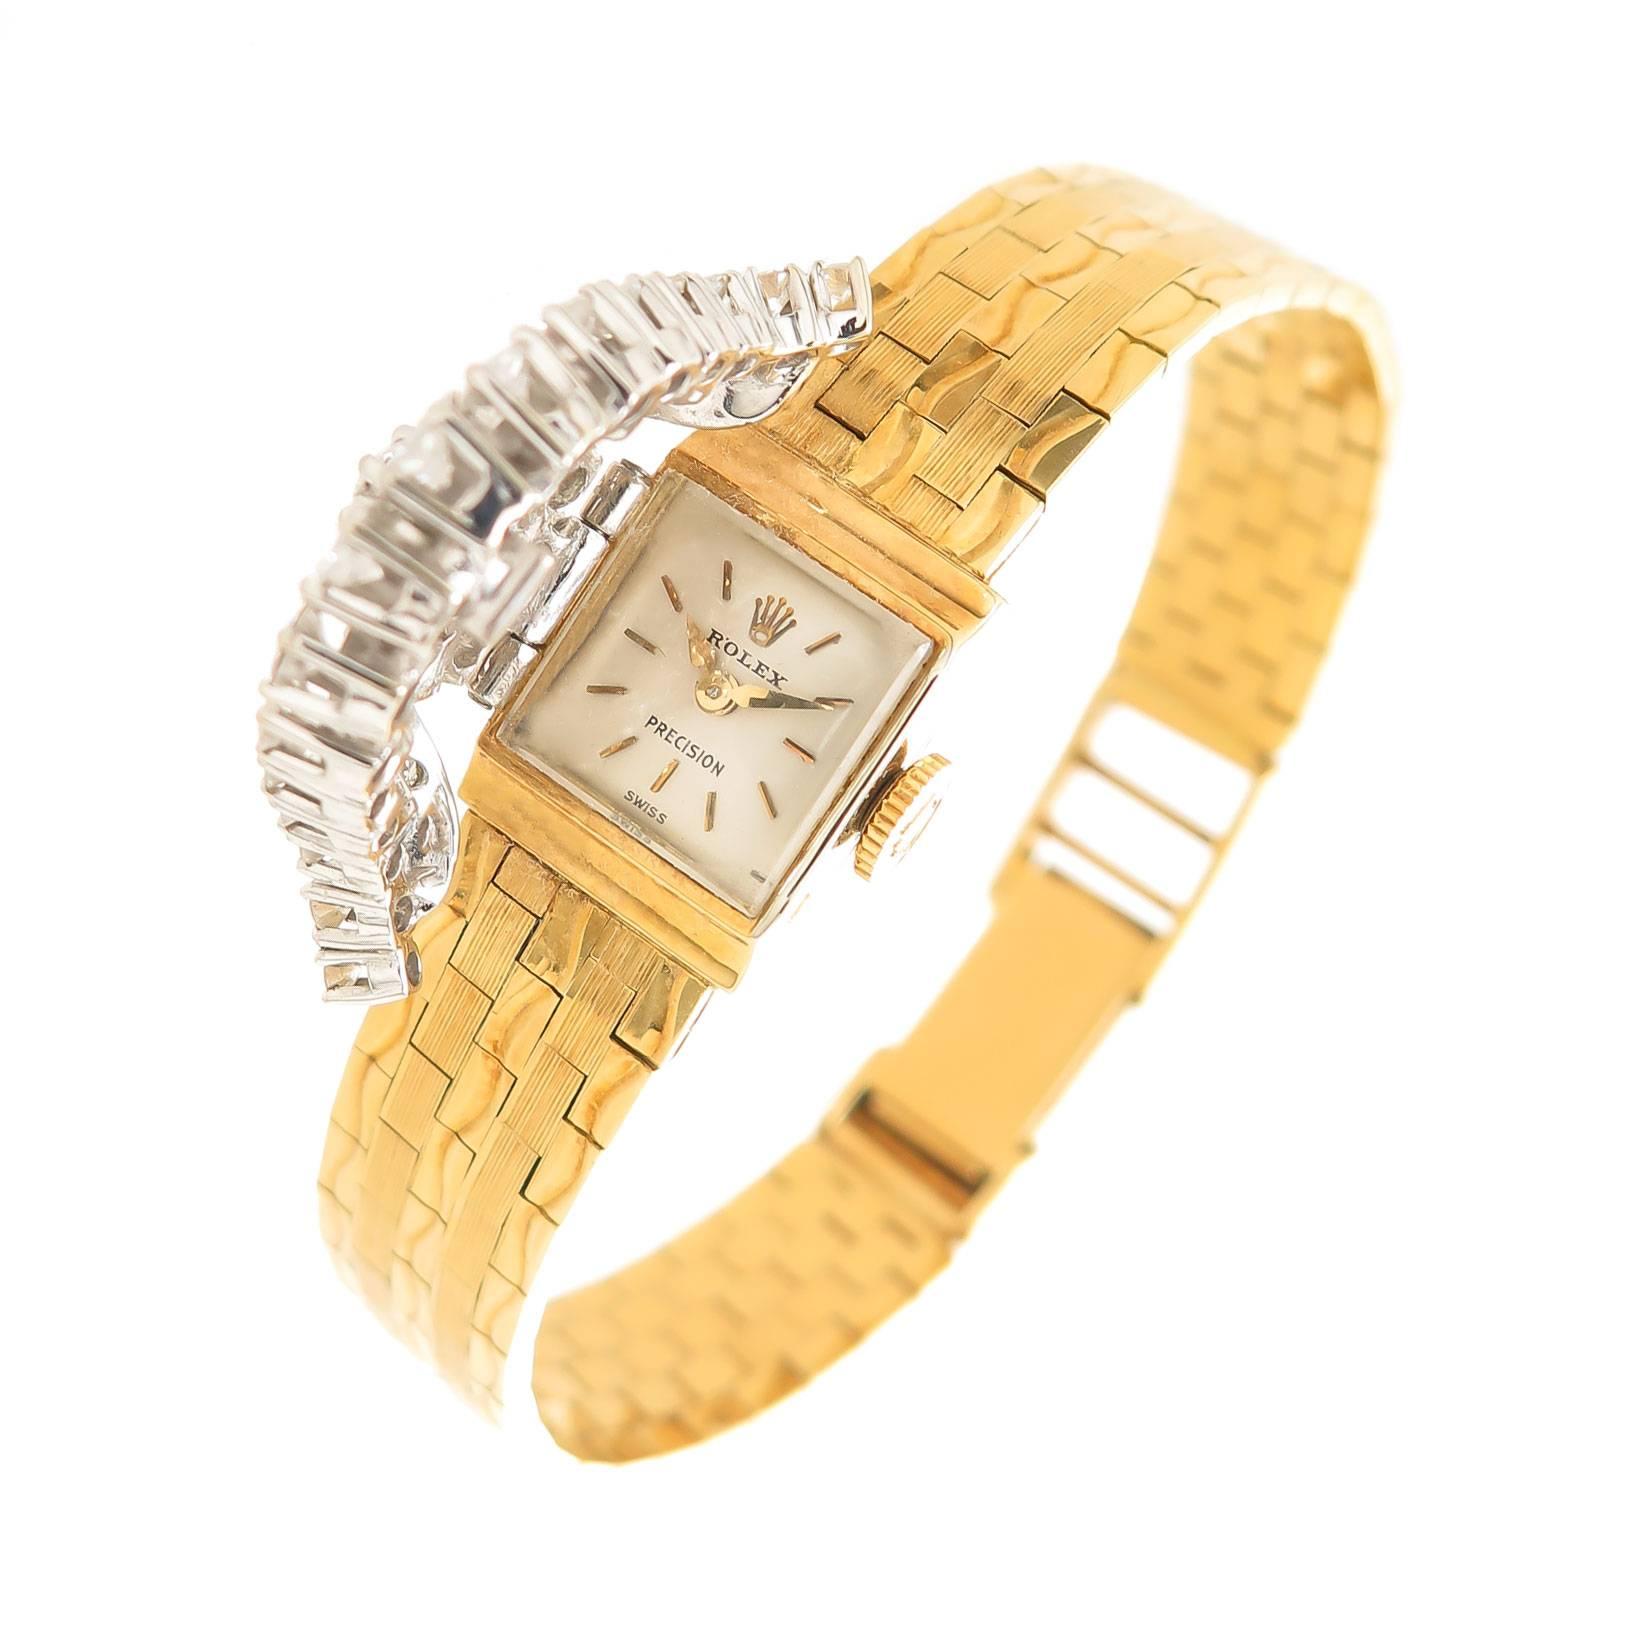 Circa 1960s Rolex ladies Covered Bracelet Watch, 18K Yellow Gold Signed Rolex Case with a White Gold Hinged Cover set with Fine color Round Brilliant cut Diamonds Totaling 1.25 Carats. 17 Jewel mechanical, manual Wind Movement, Original white dial